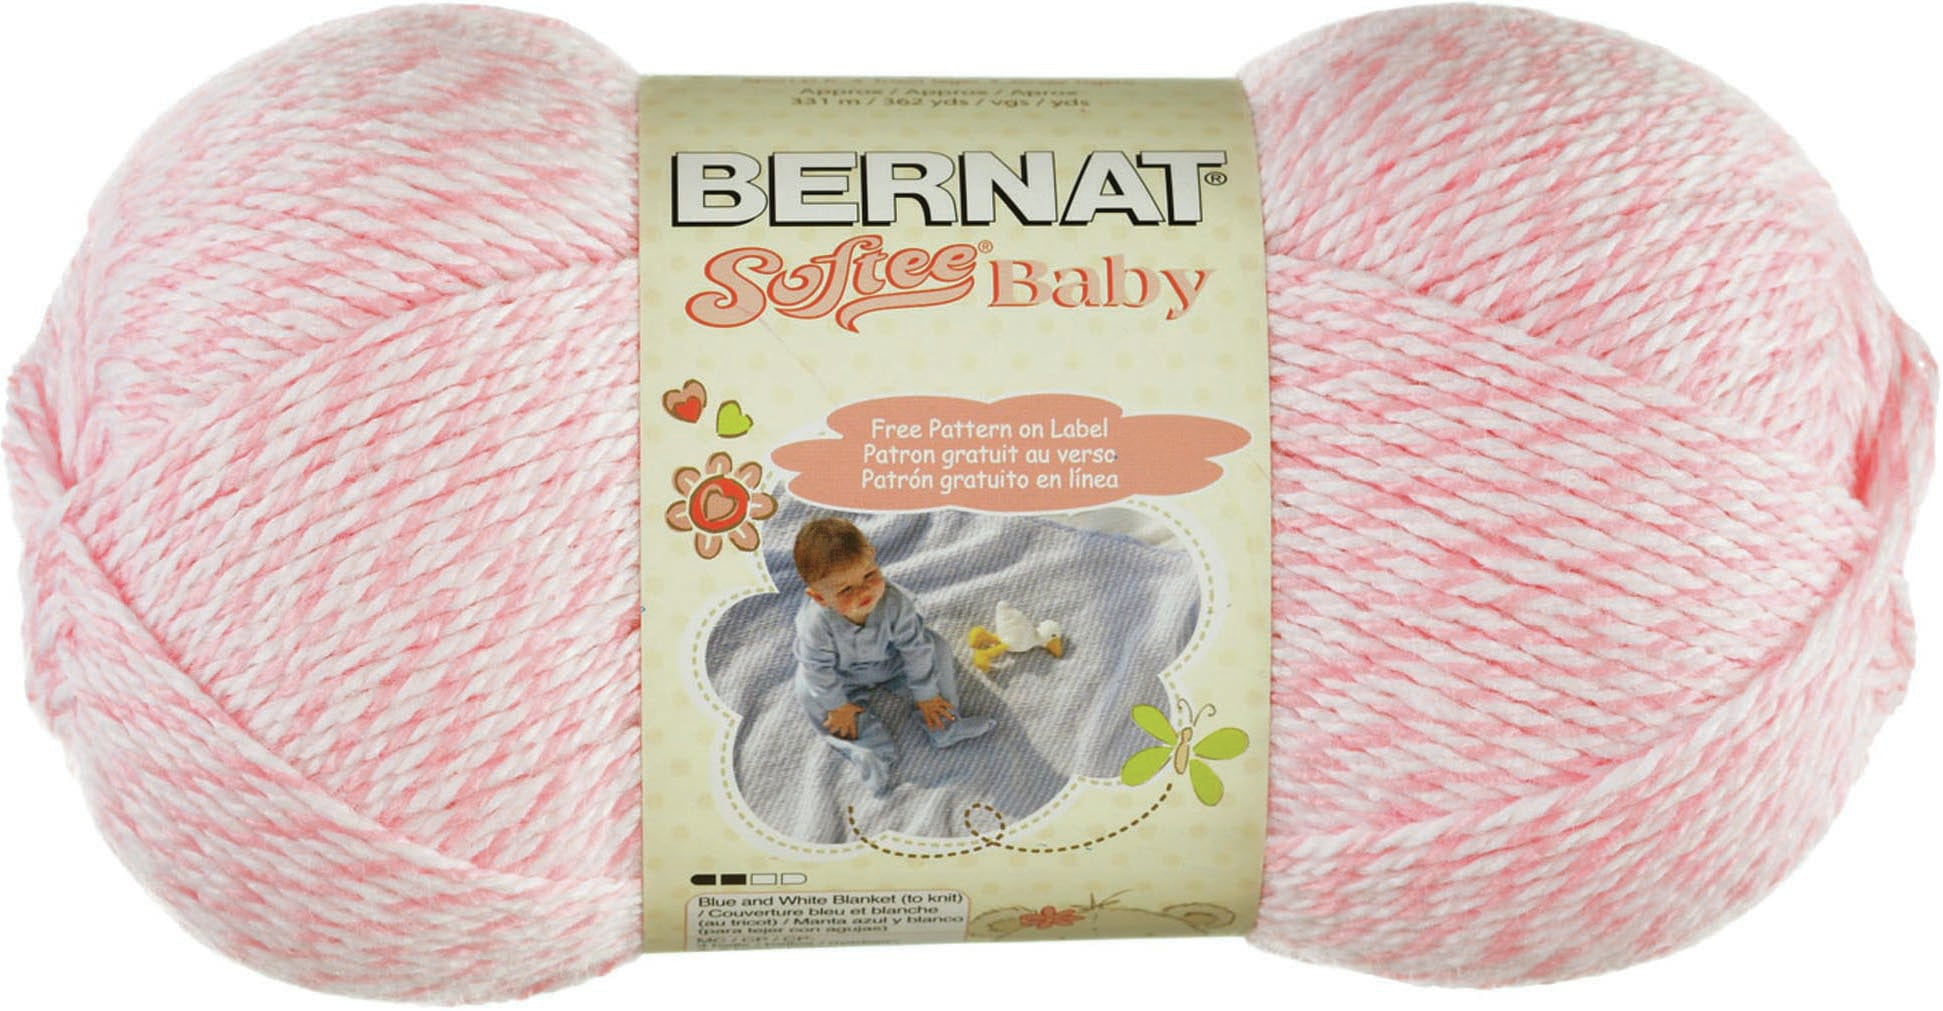 Bernat Softee Baby Yarn - Solids-Soft Peach, 1 count - Fry's Food Stores